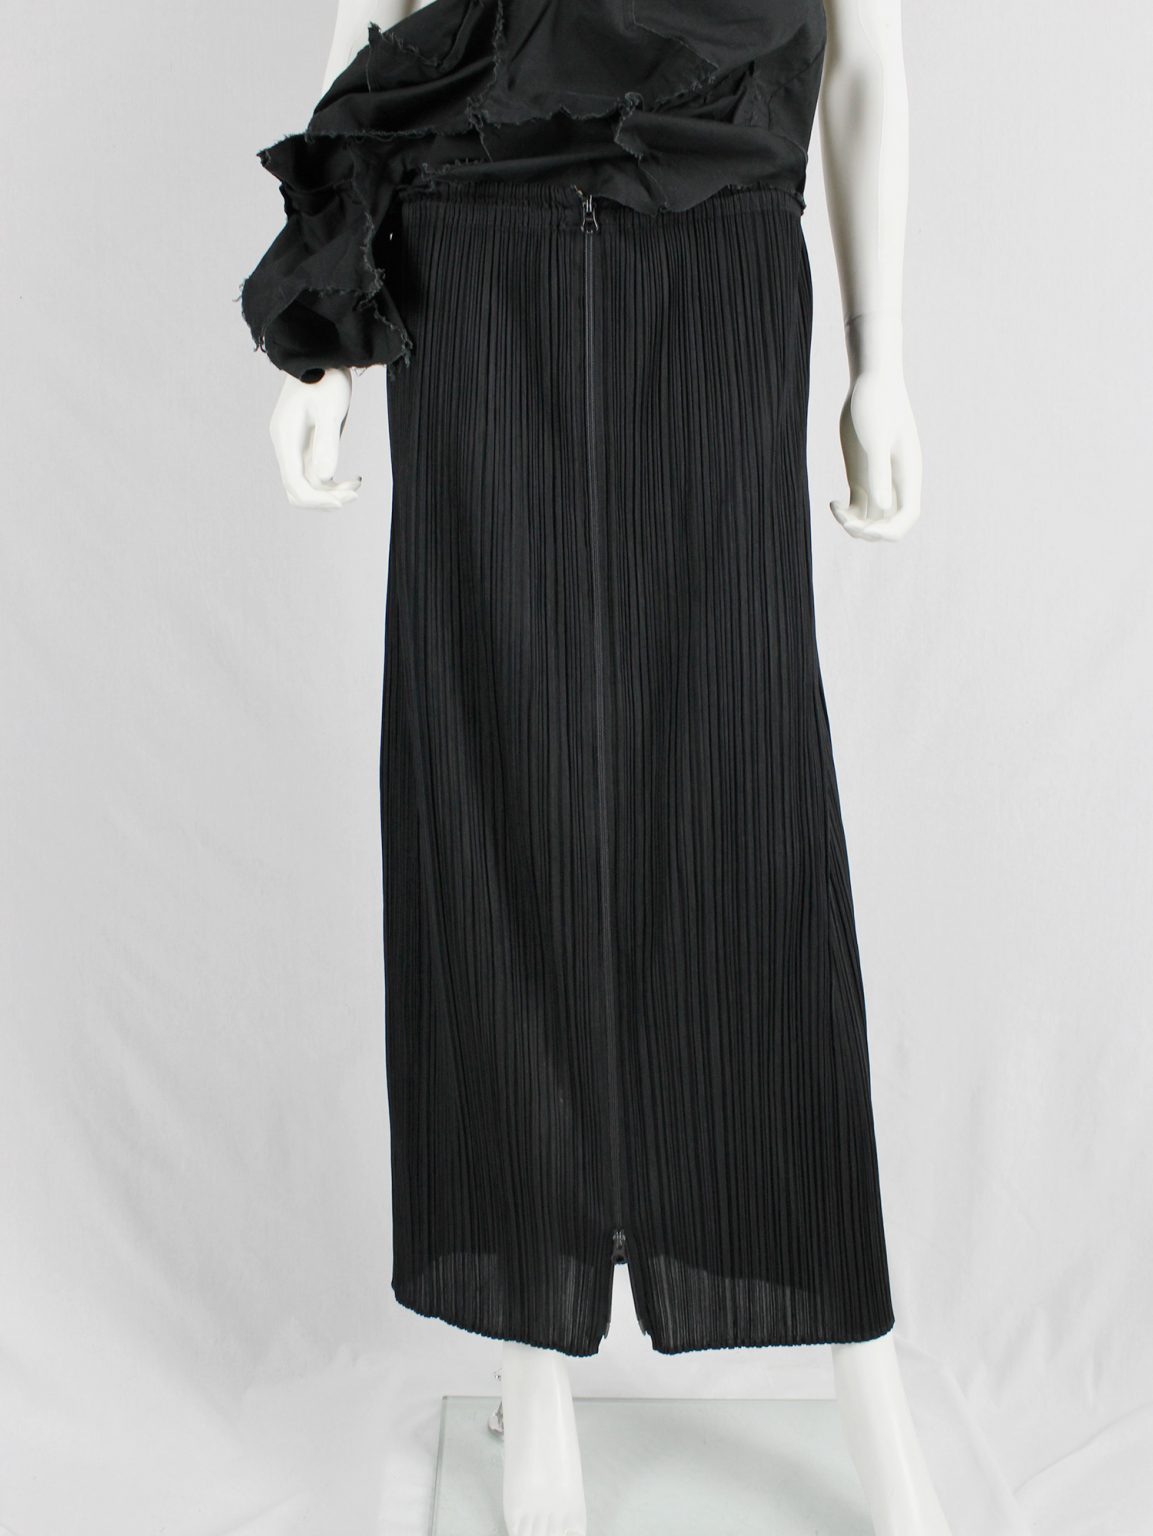 Issey Miyake Pleats Please black pleated maxi skirt with front zipper